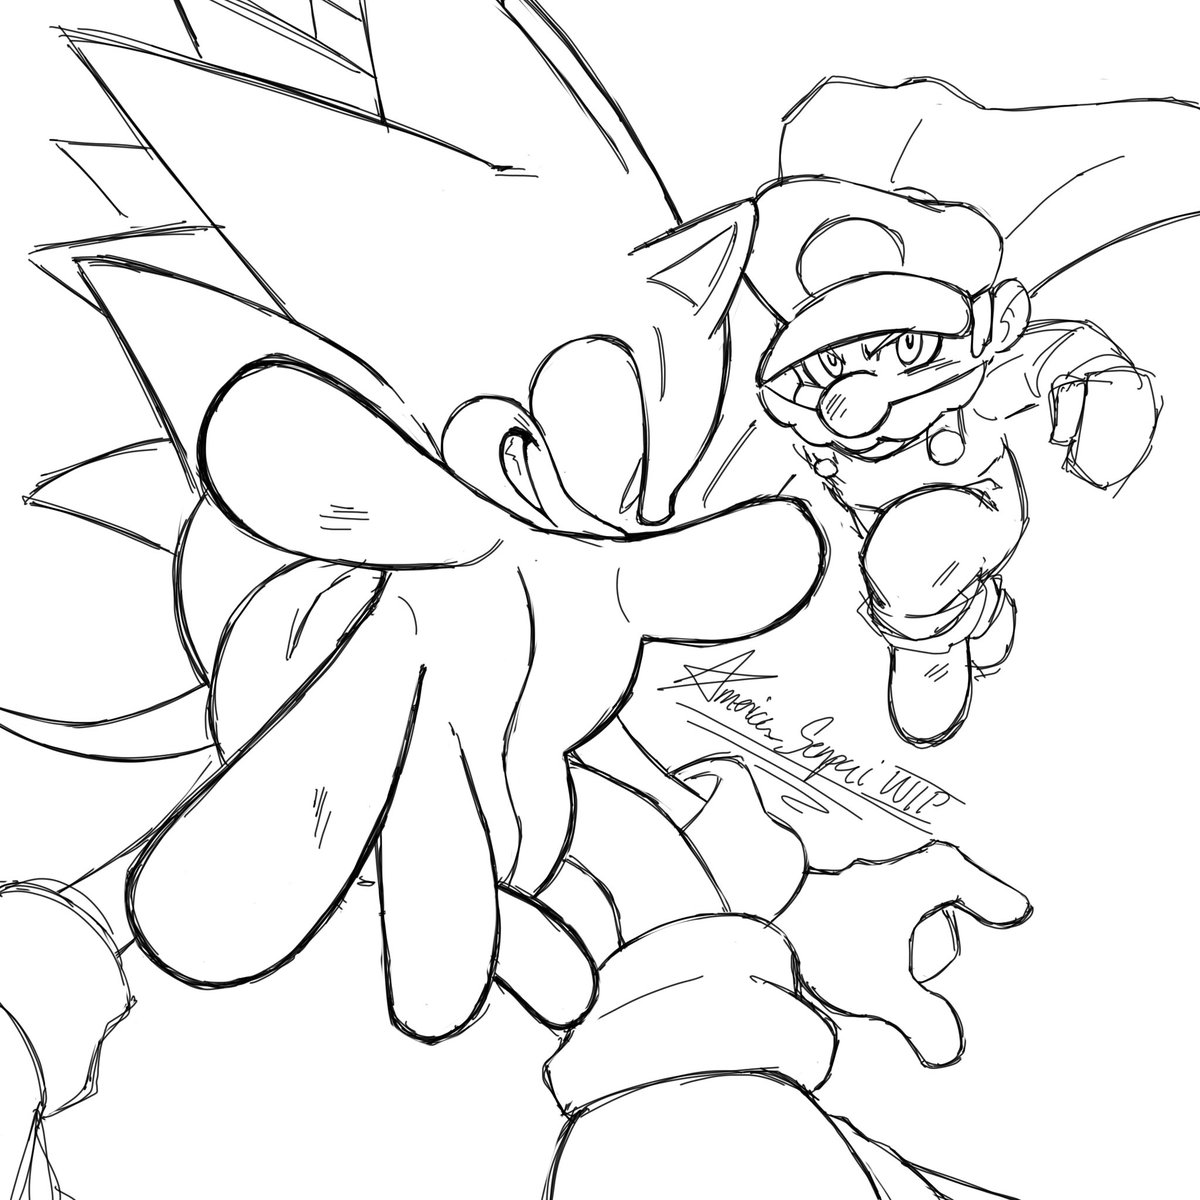 Not me posting a wip on Twitter dot com

#SonicTheHedgehog 
#Mario 